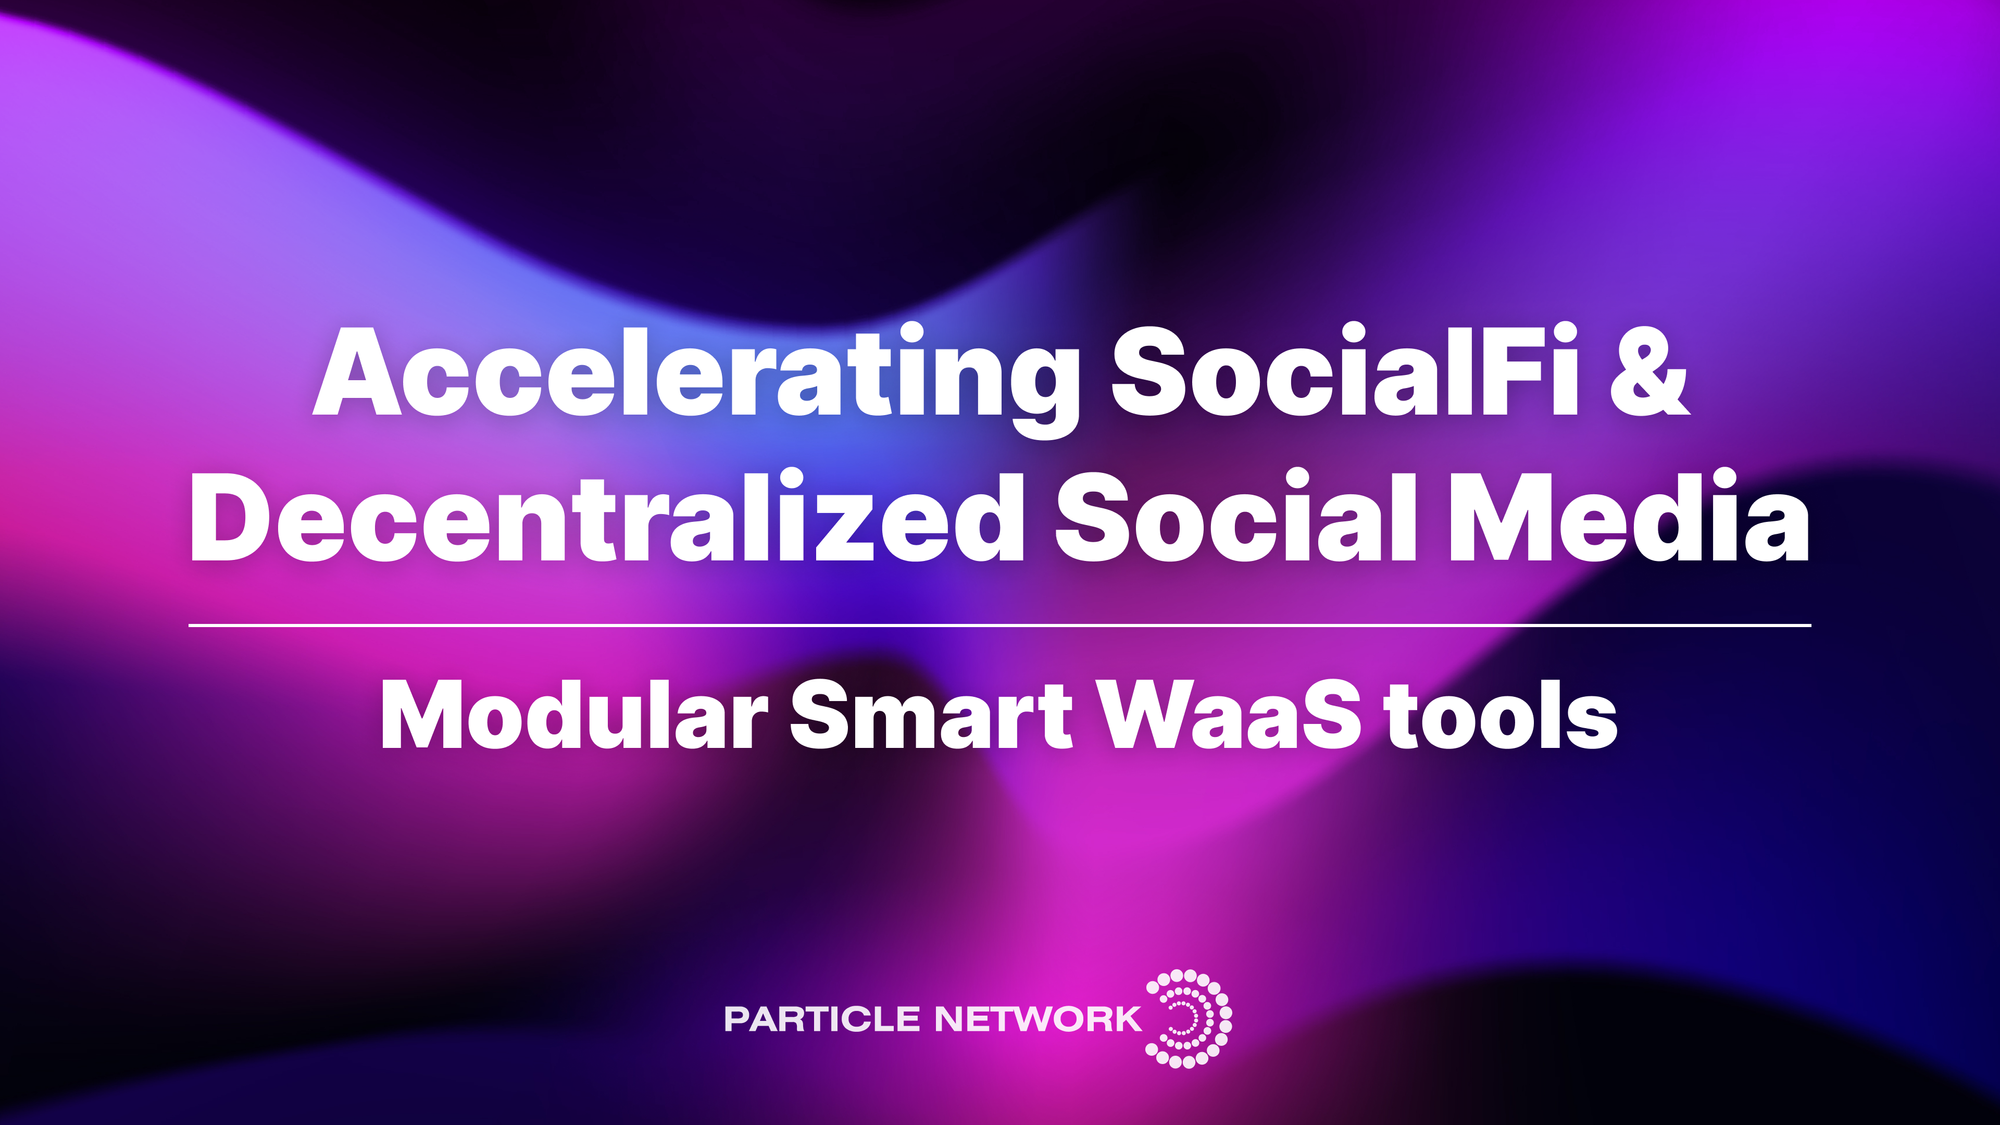 SocialFi & Decentralized Social Media for the Masses: The Role of Smart WaaS Tools.